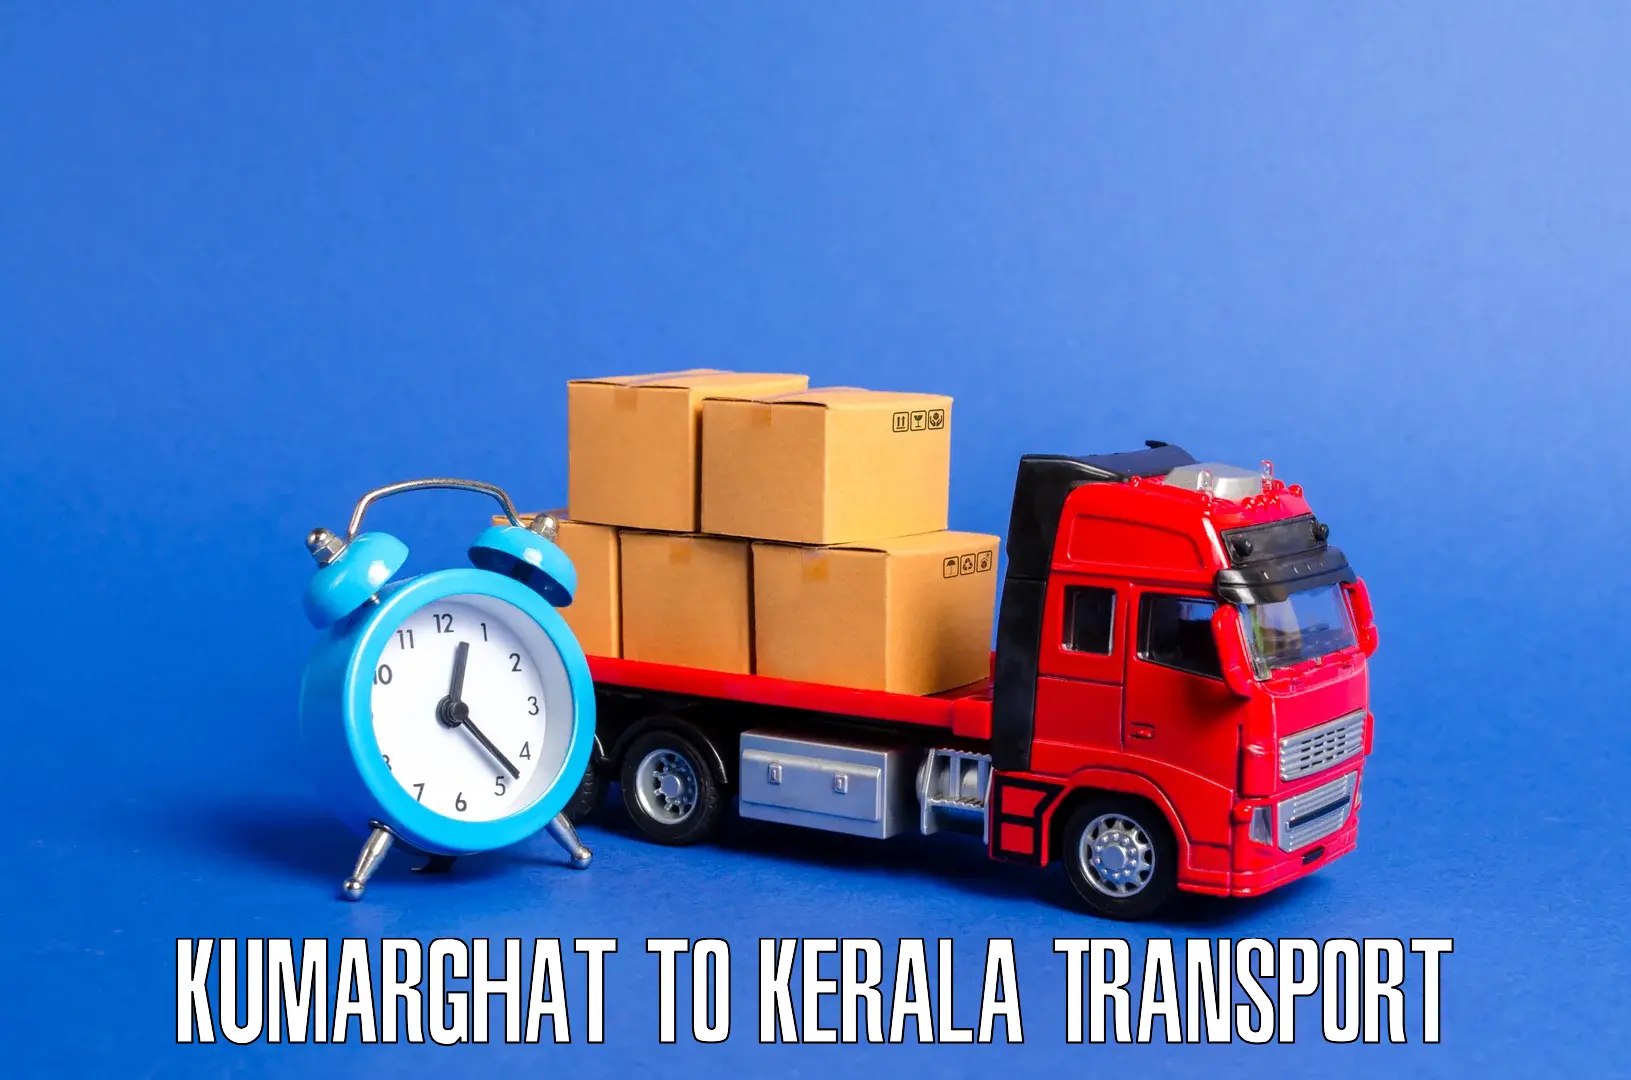 Pick up transport service in Kumarghat to Kozhikode